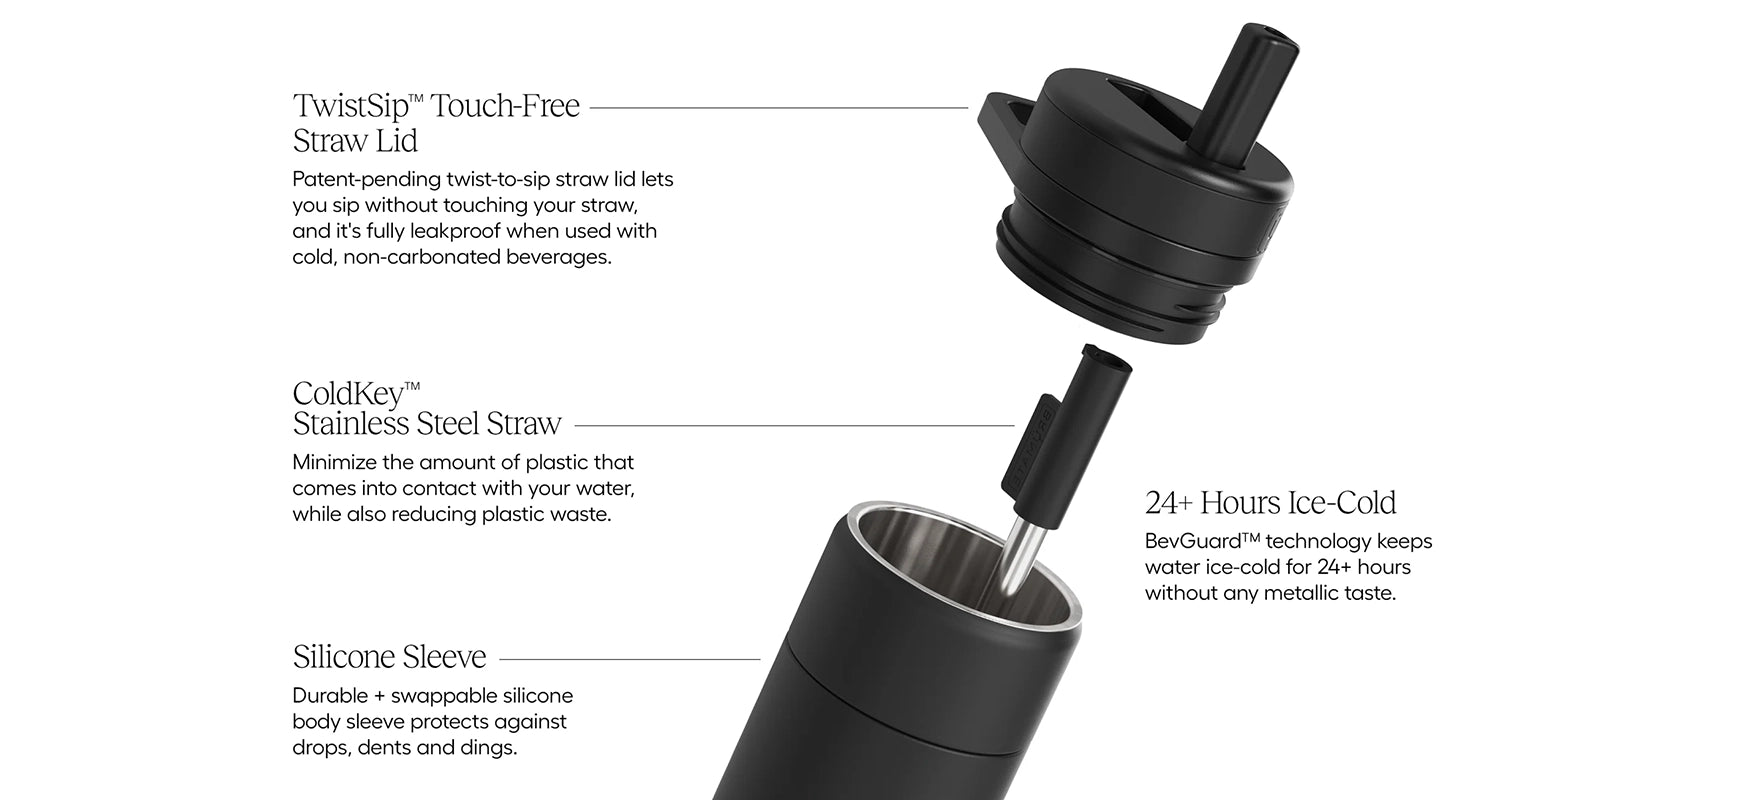 Brumate Rotera hydration Bottle in Matte Black call out graphic with product details